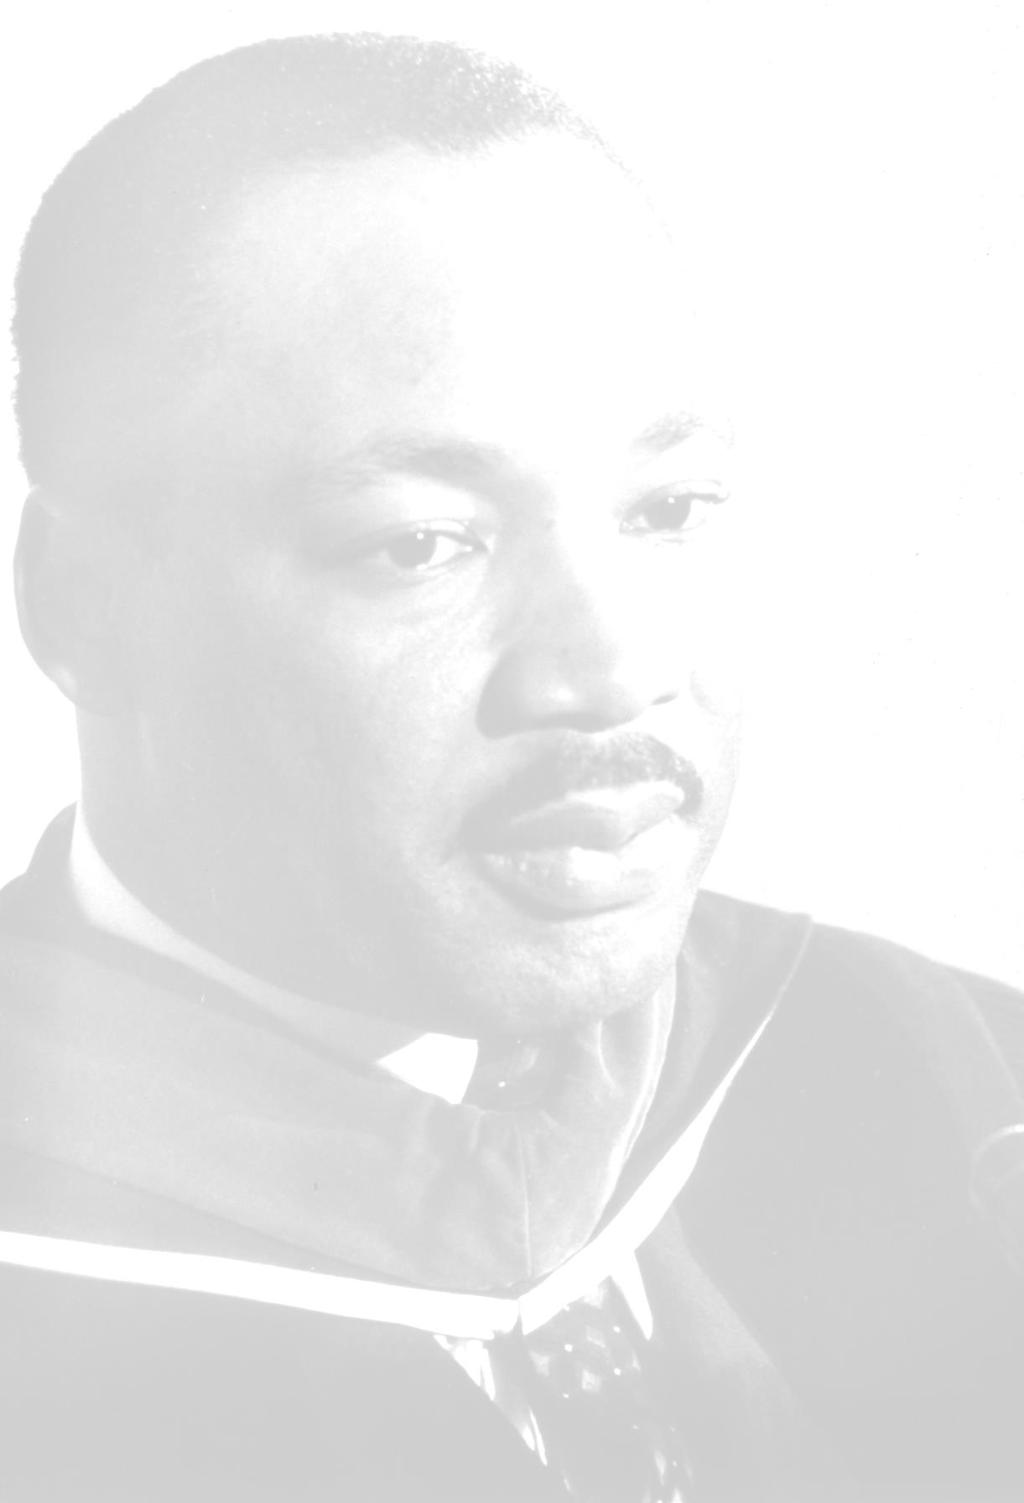 4th Annual Wright State University MLK Distinguished Service Awards 2014 Nomination Form Eligibility Criteria: The Multicultural Center at Wright State University annually recognizes individuals or